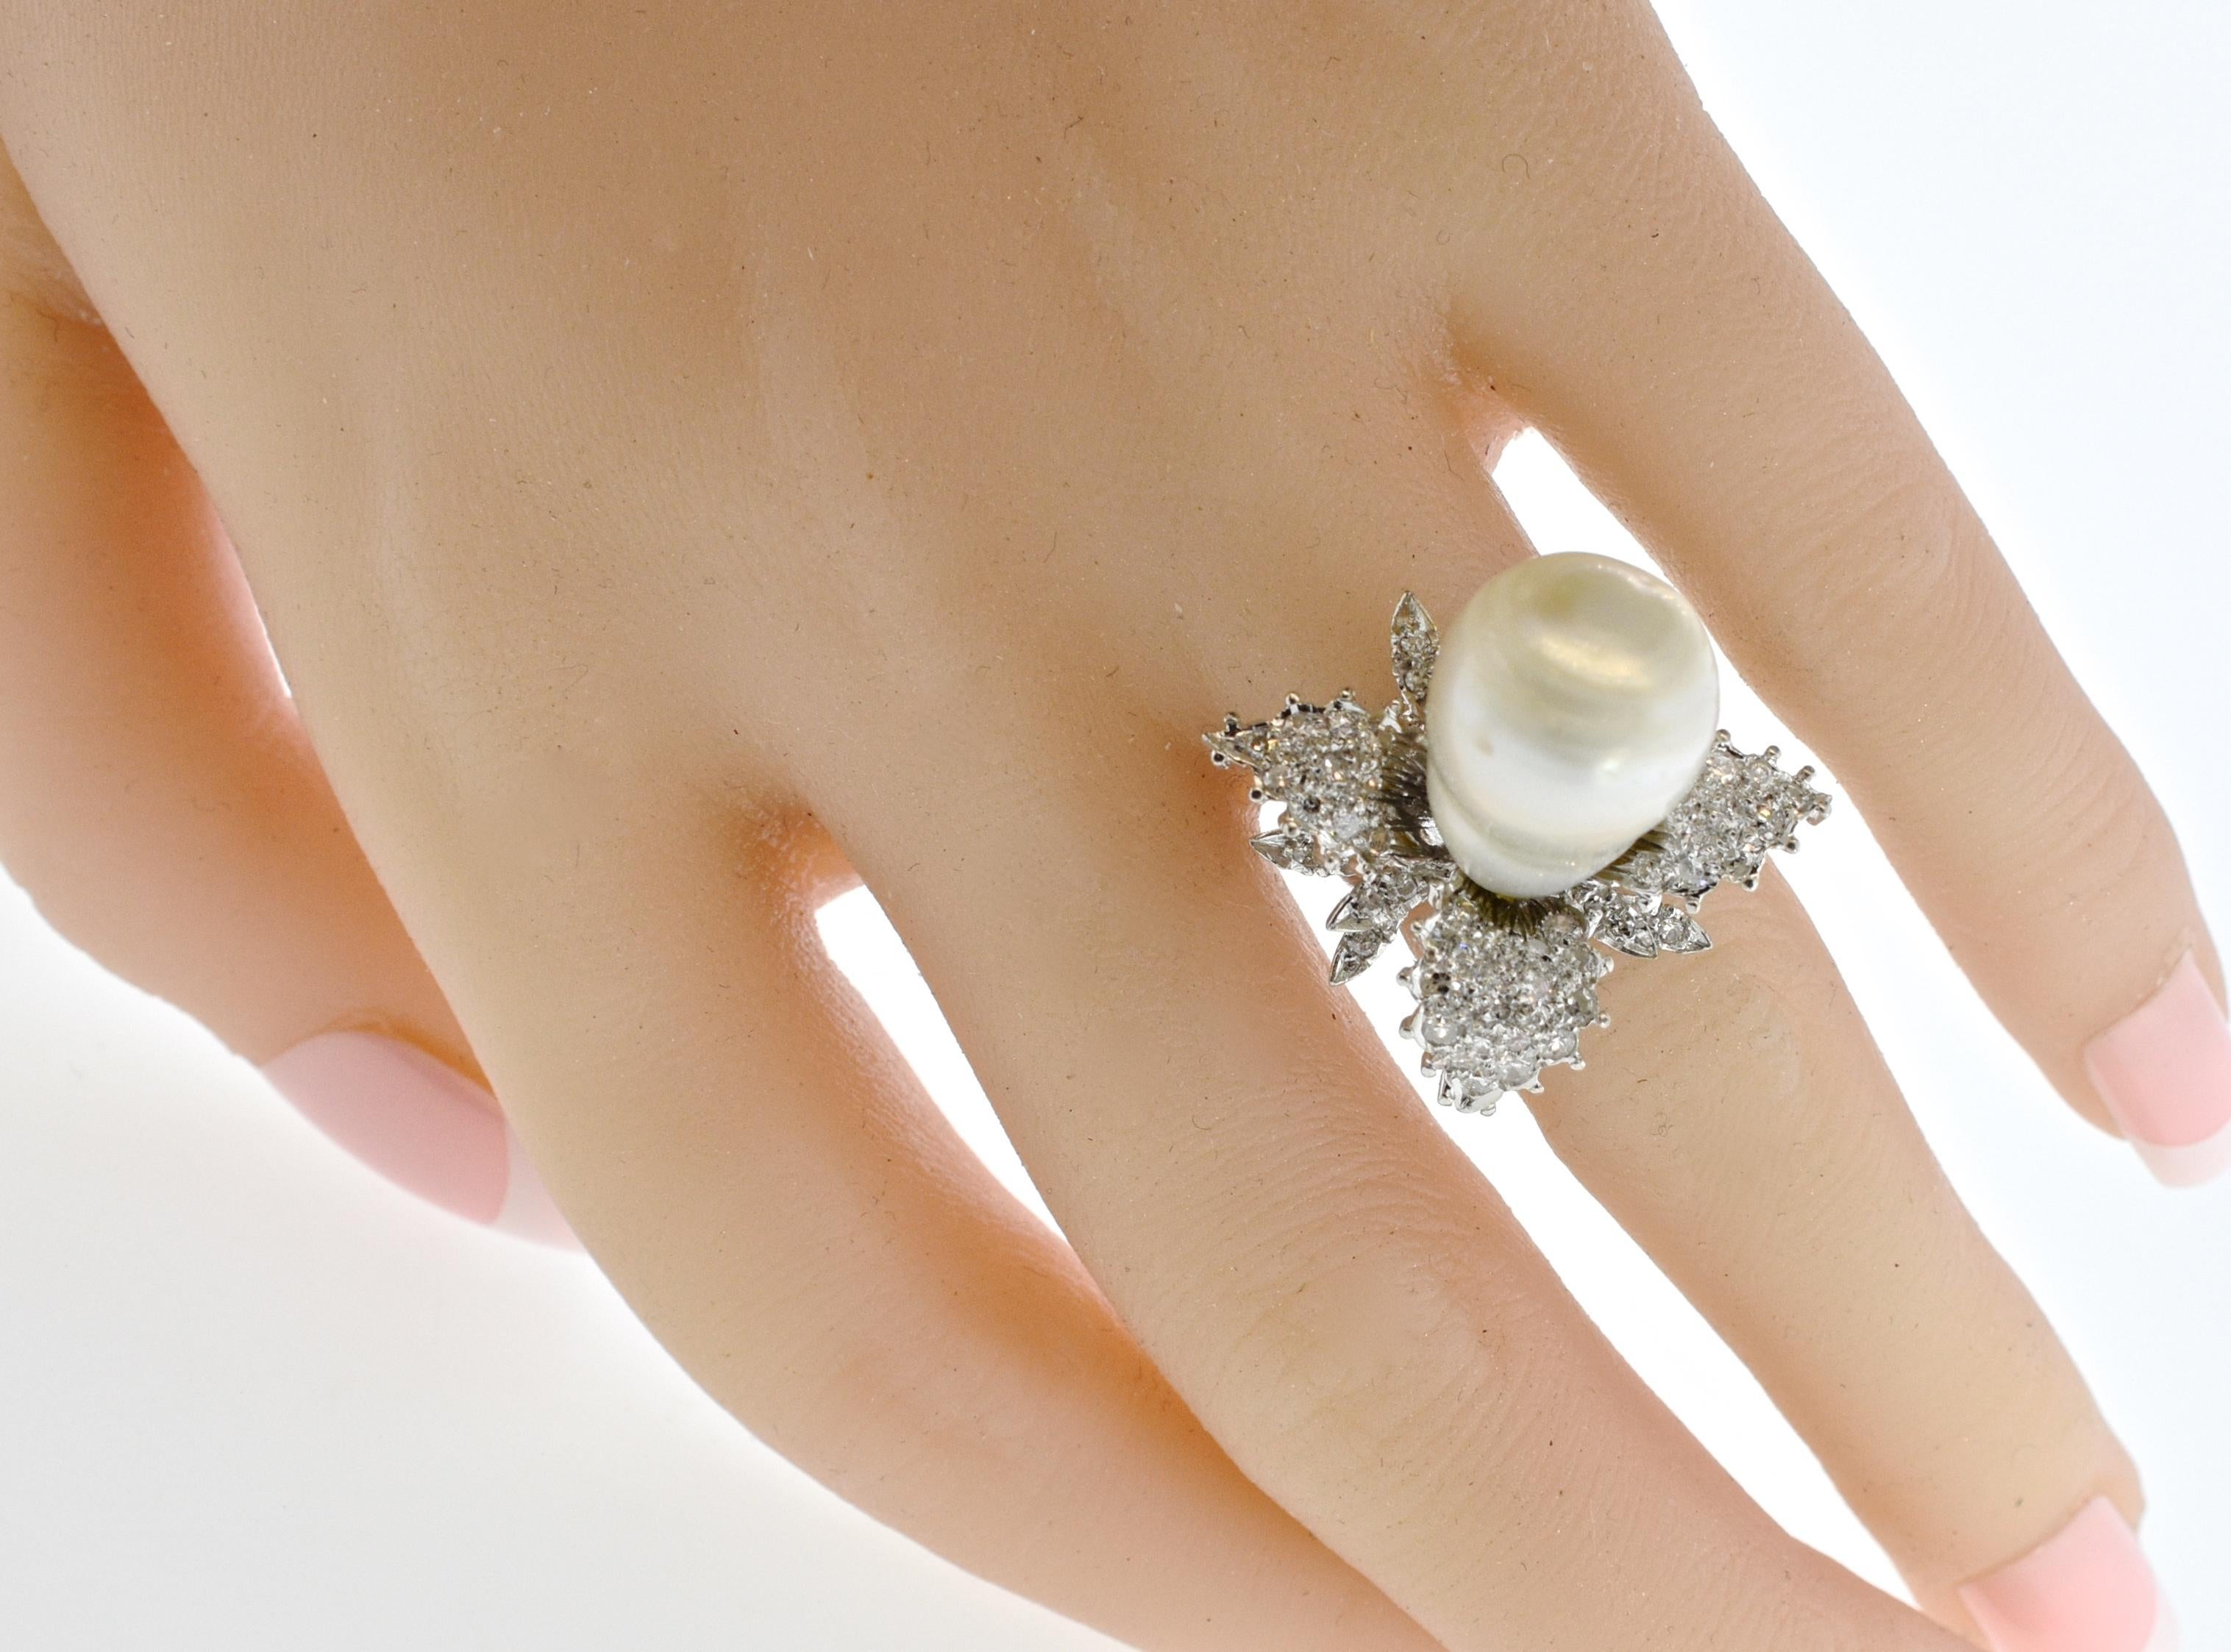 Baroque pearl - large and fine - is set in the center of leaves of  50 white diamonds, pave set in the 